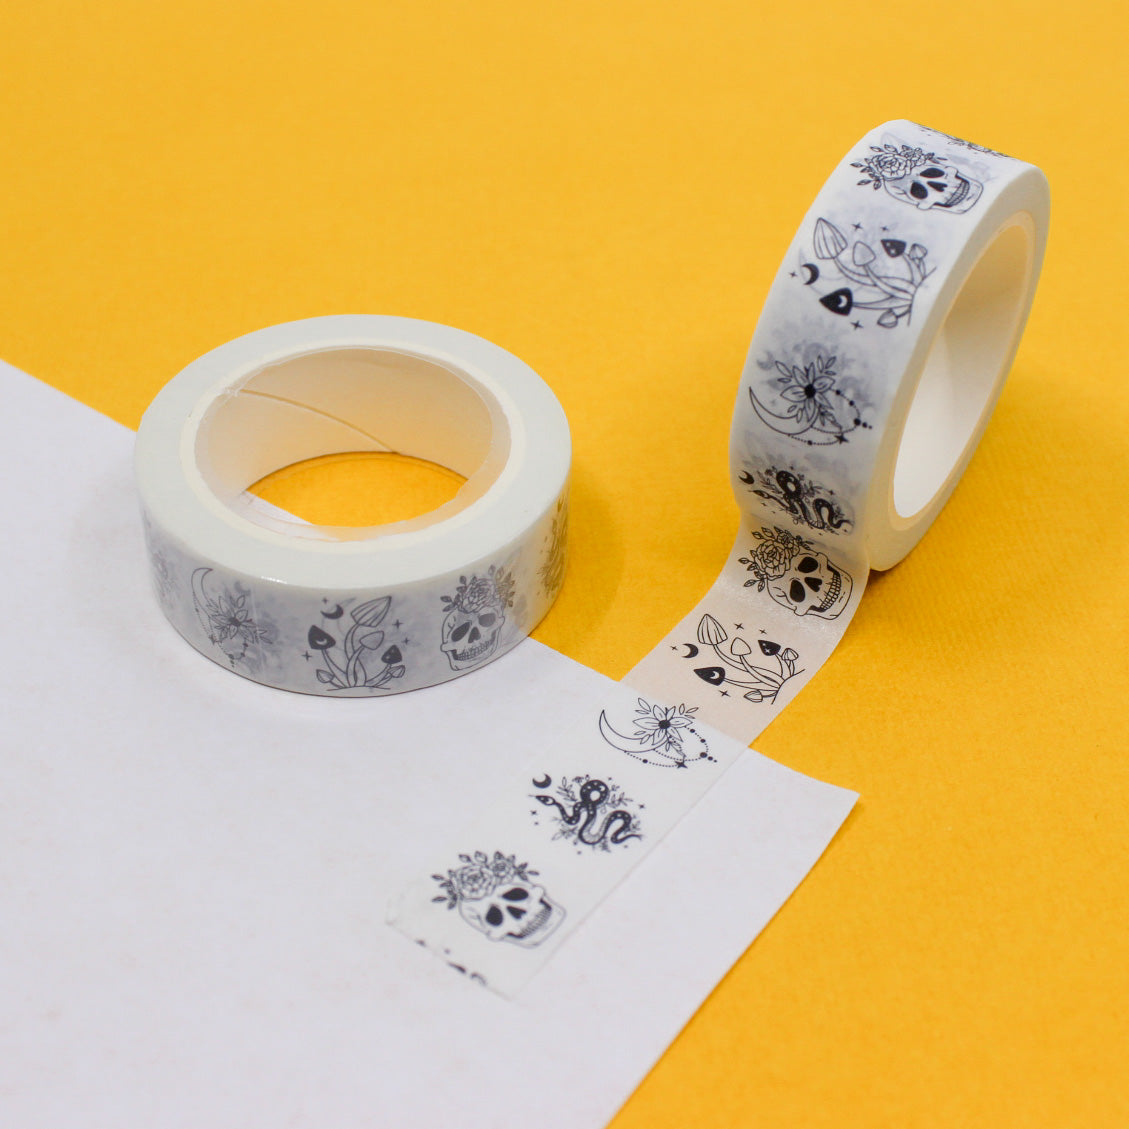 Floral and Skull Washi Tape, a unique design with colorful flowers and intricately detailed skulls, a blend of nature and the macabre. This tape is sold at BBB Supplies Craft Shop.